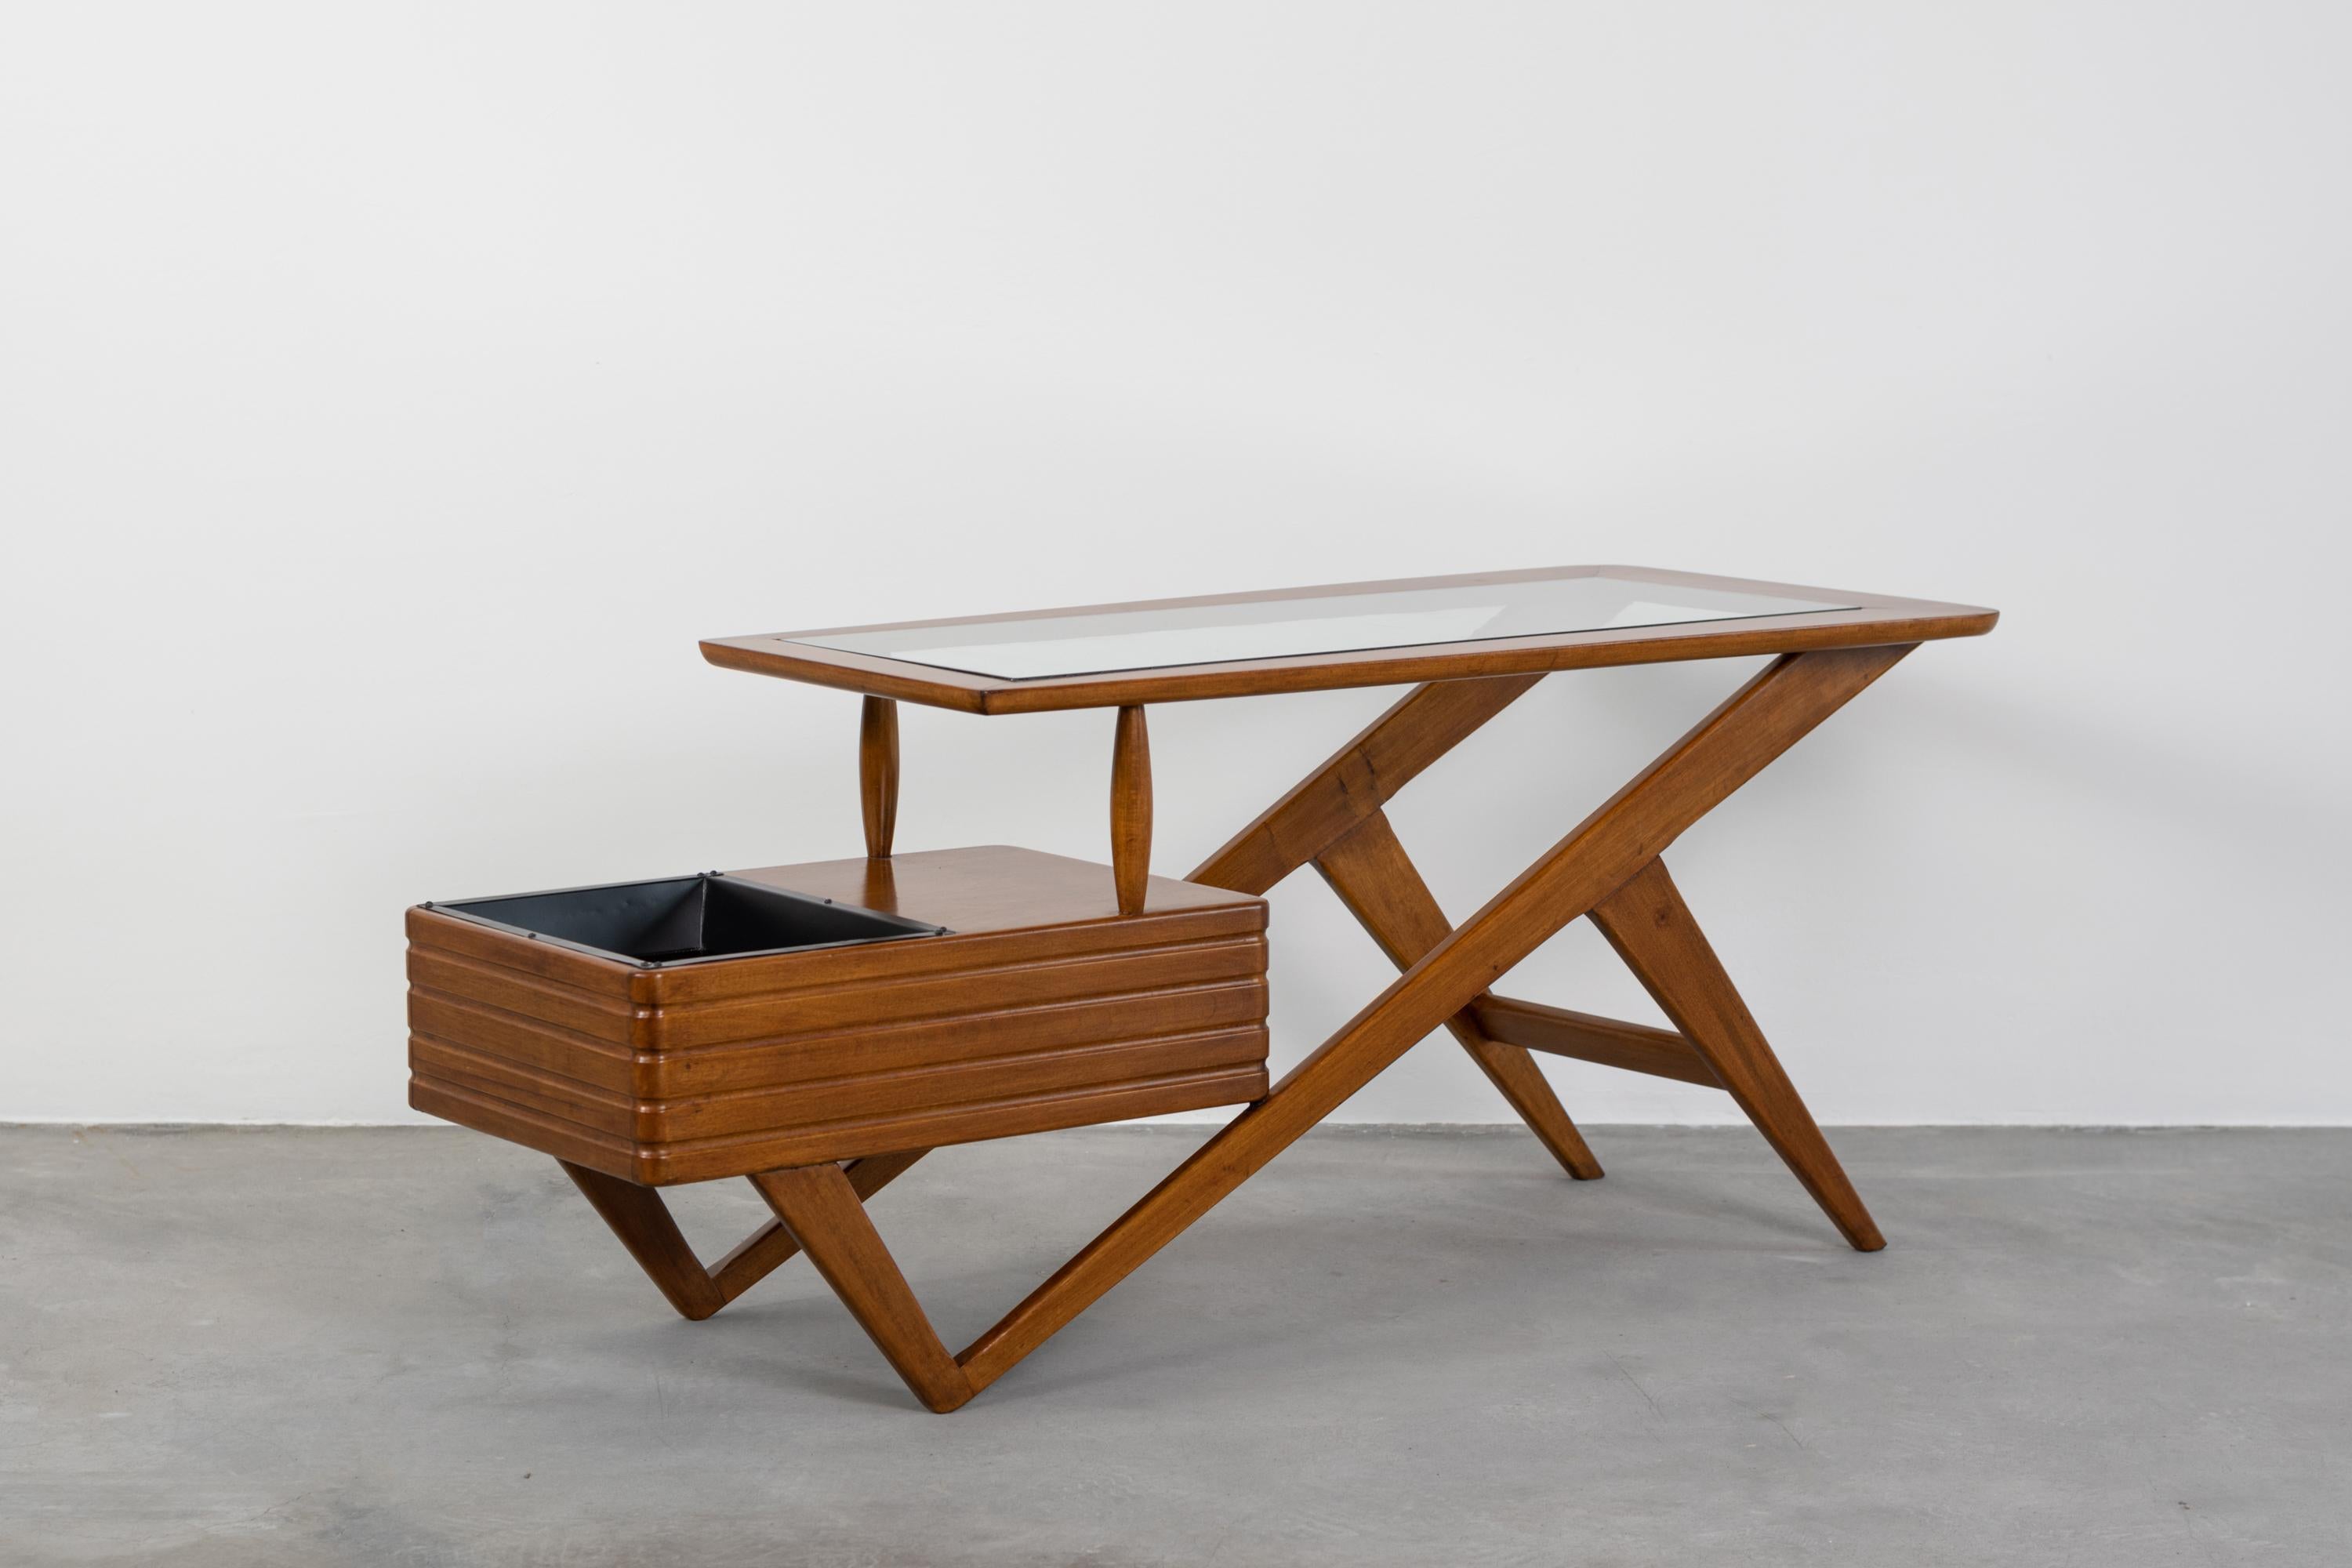 Rare serving table with a structure in walnut wood and ground crystal on top, designed by Mario Gottardi, Italian manufacture from the 1950s. 

Mario Gottardi was born in Venice in 1913. He graduated from the Politecnico di Milano in 1939 and